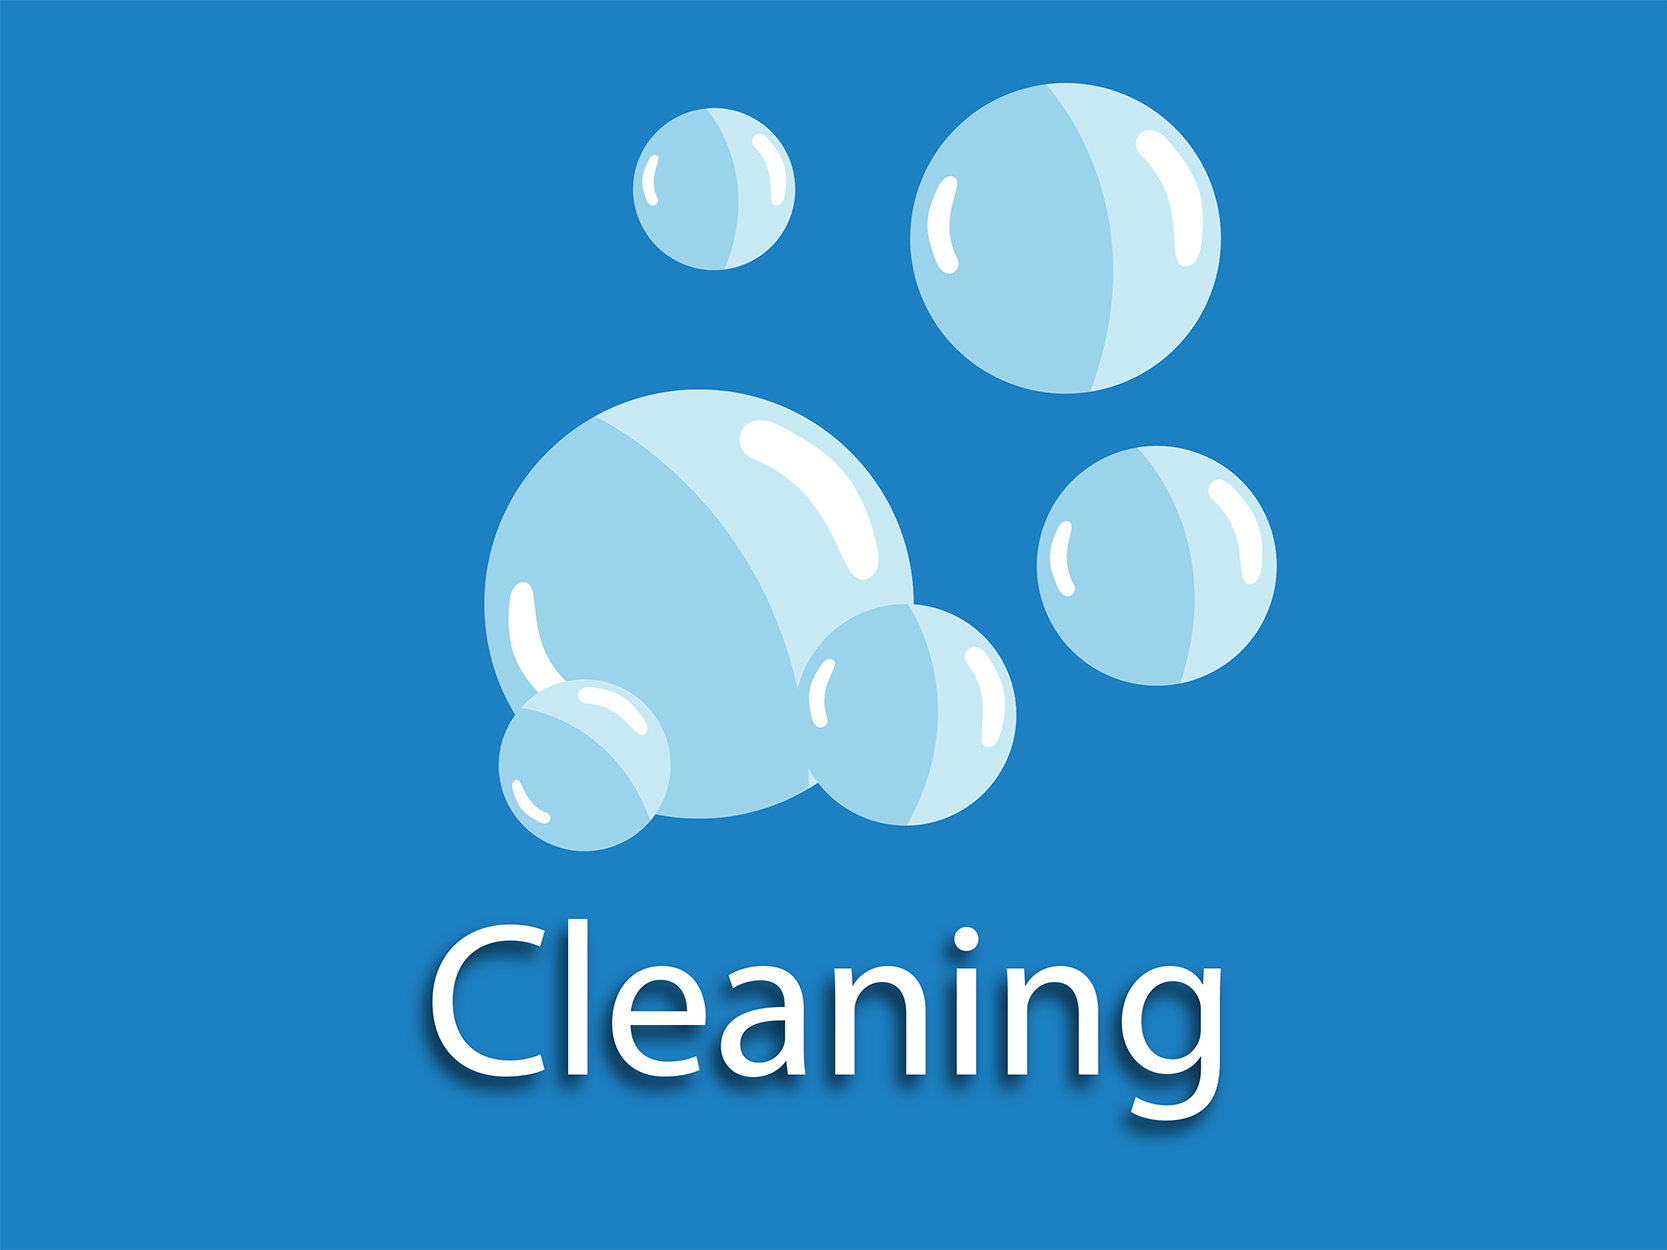 Click here to see the full list of cleaning tools